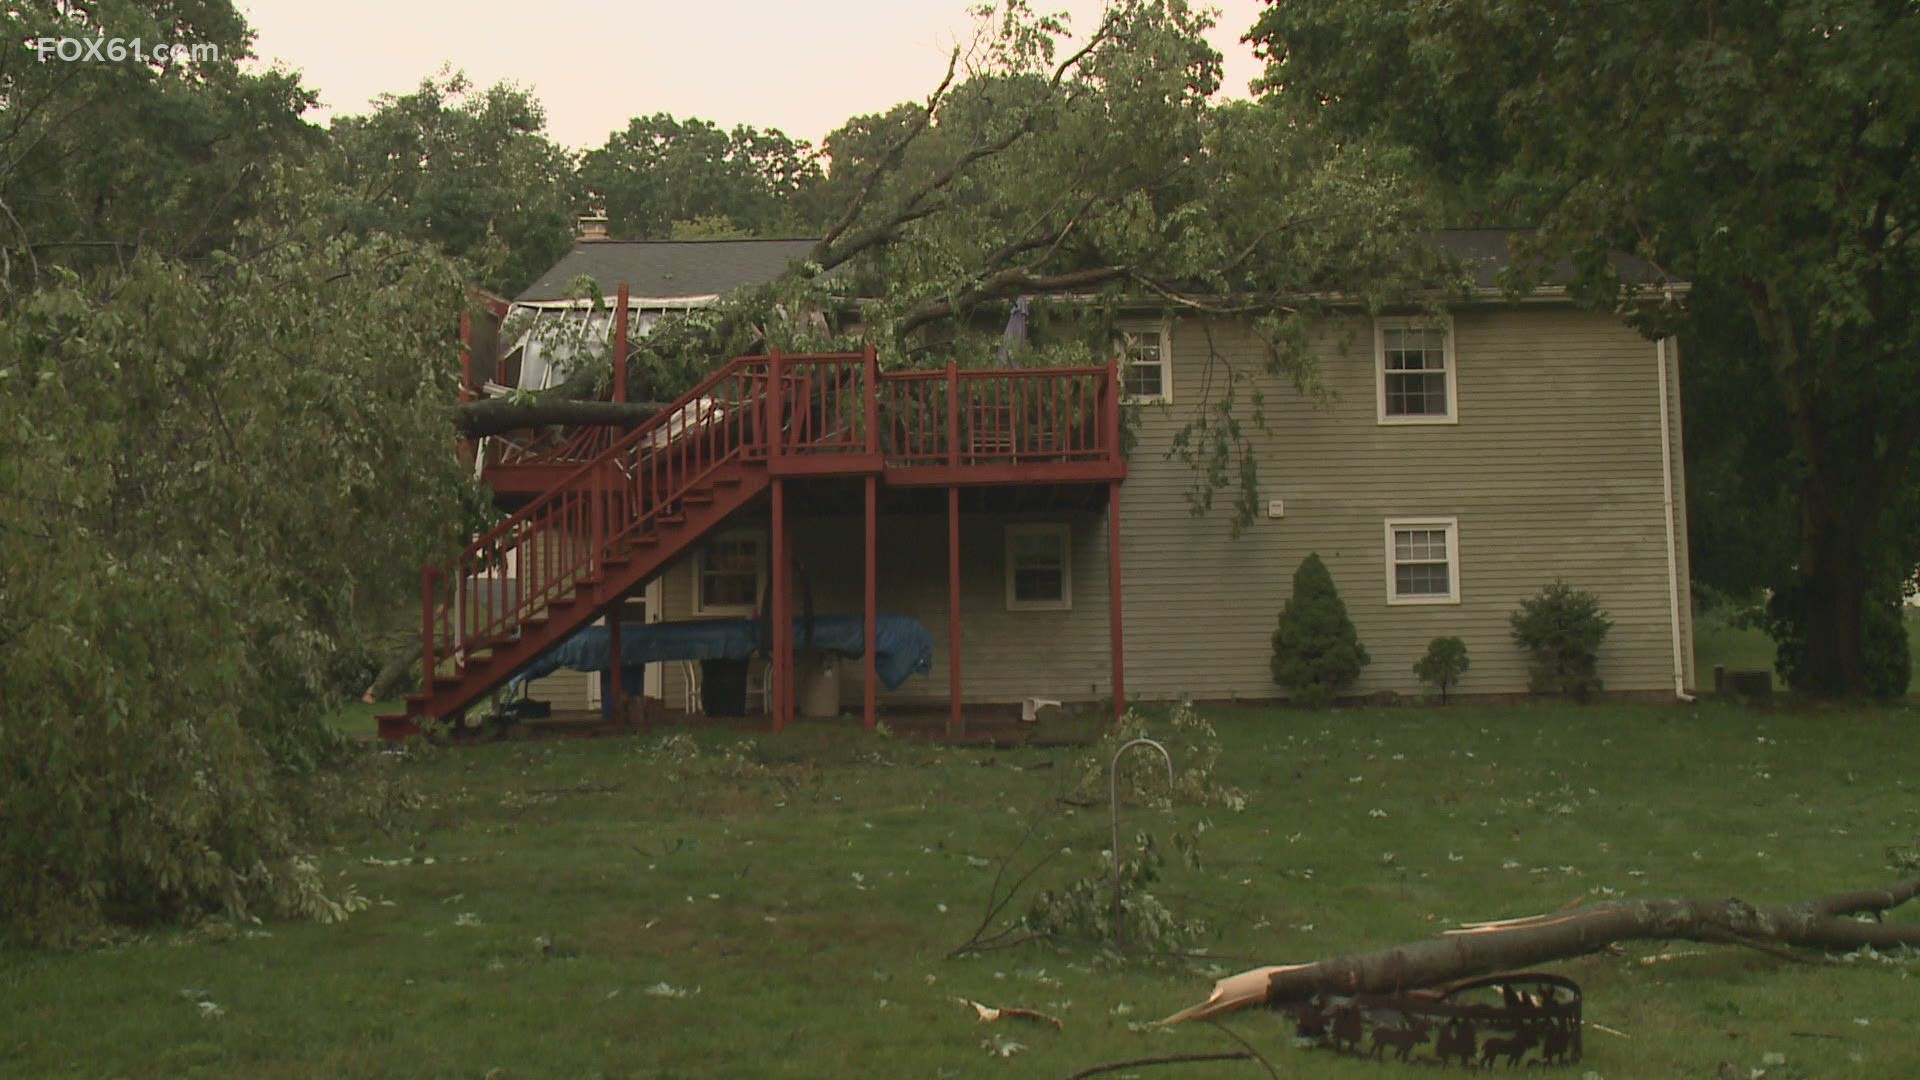 On Benjamin Way, one homeowner had several trees fall in his front and backyards, including one on his deck he had been standing on just moments before.